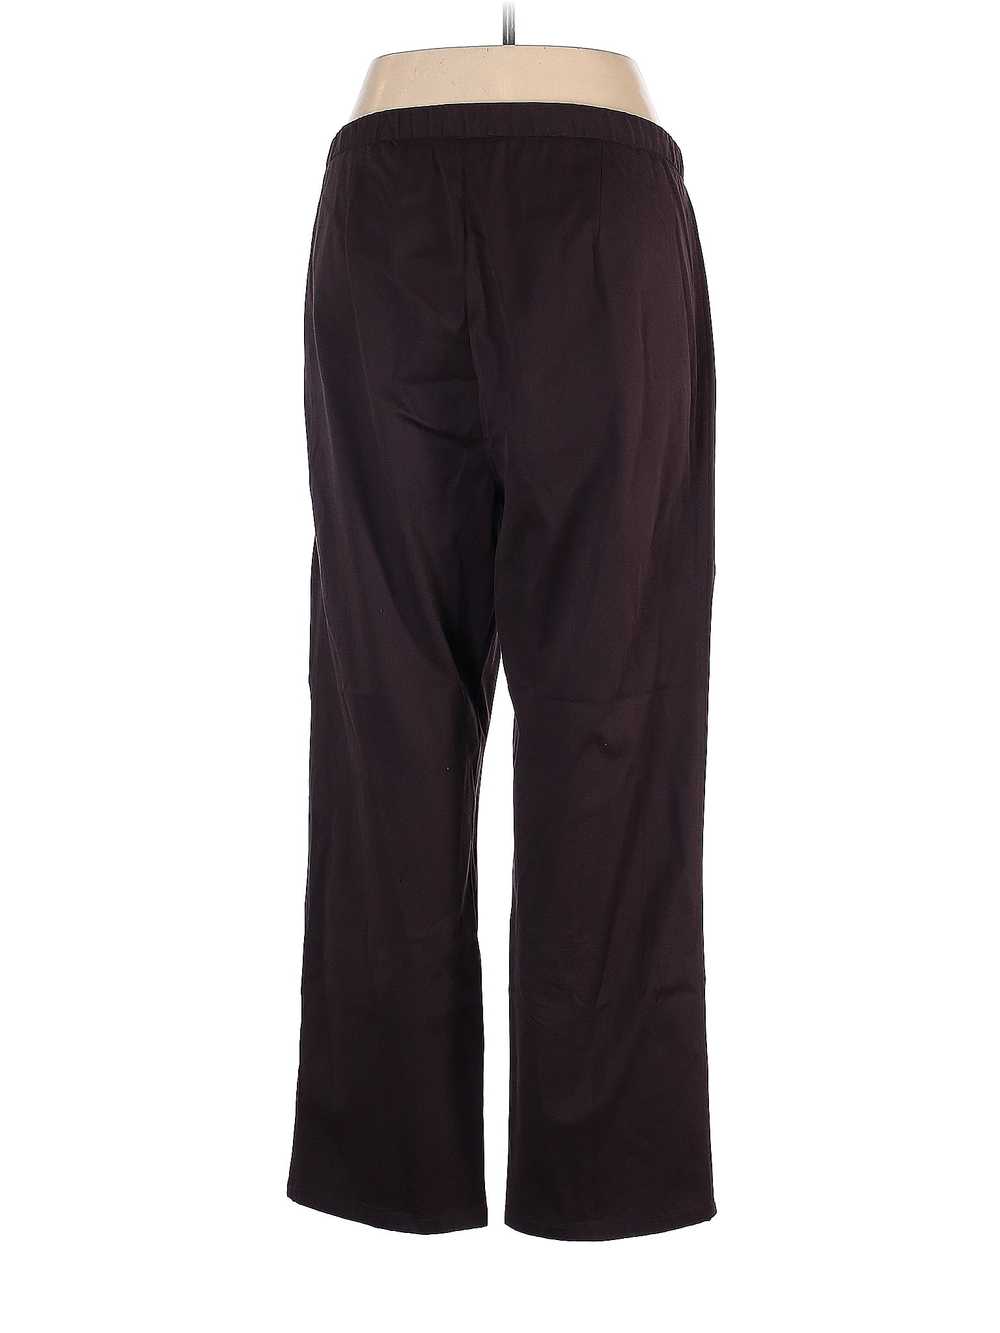 Westbound Women Brown Casual Pants 16 - image 2